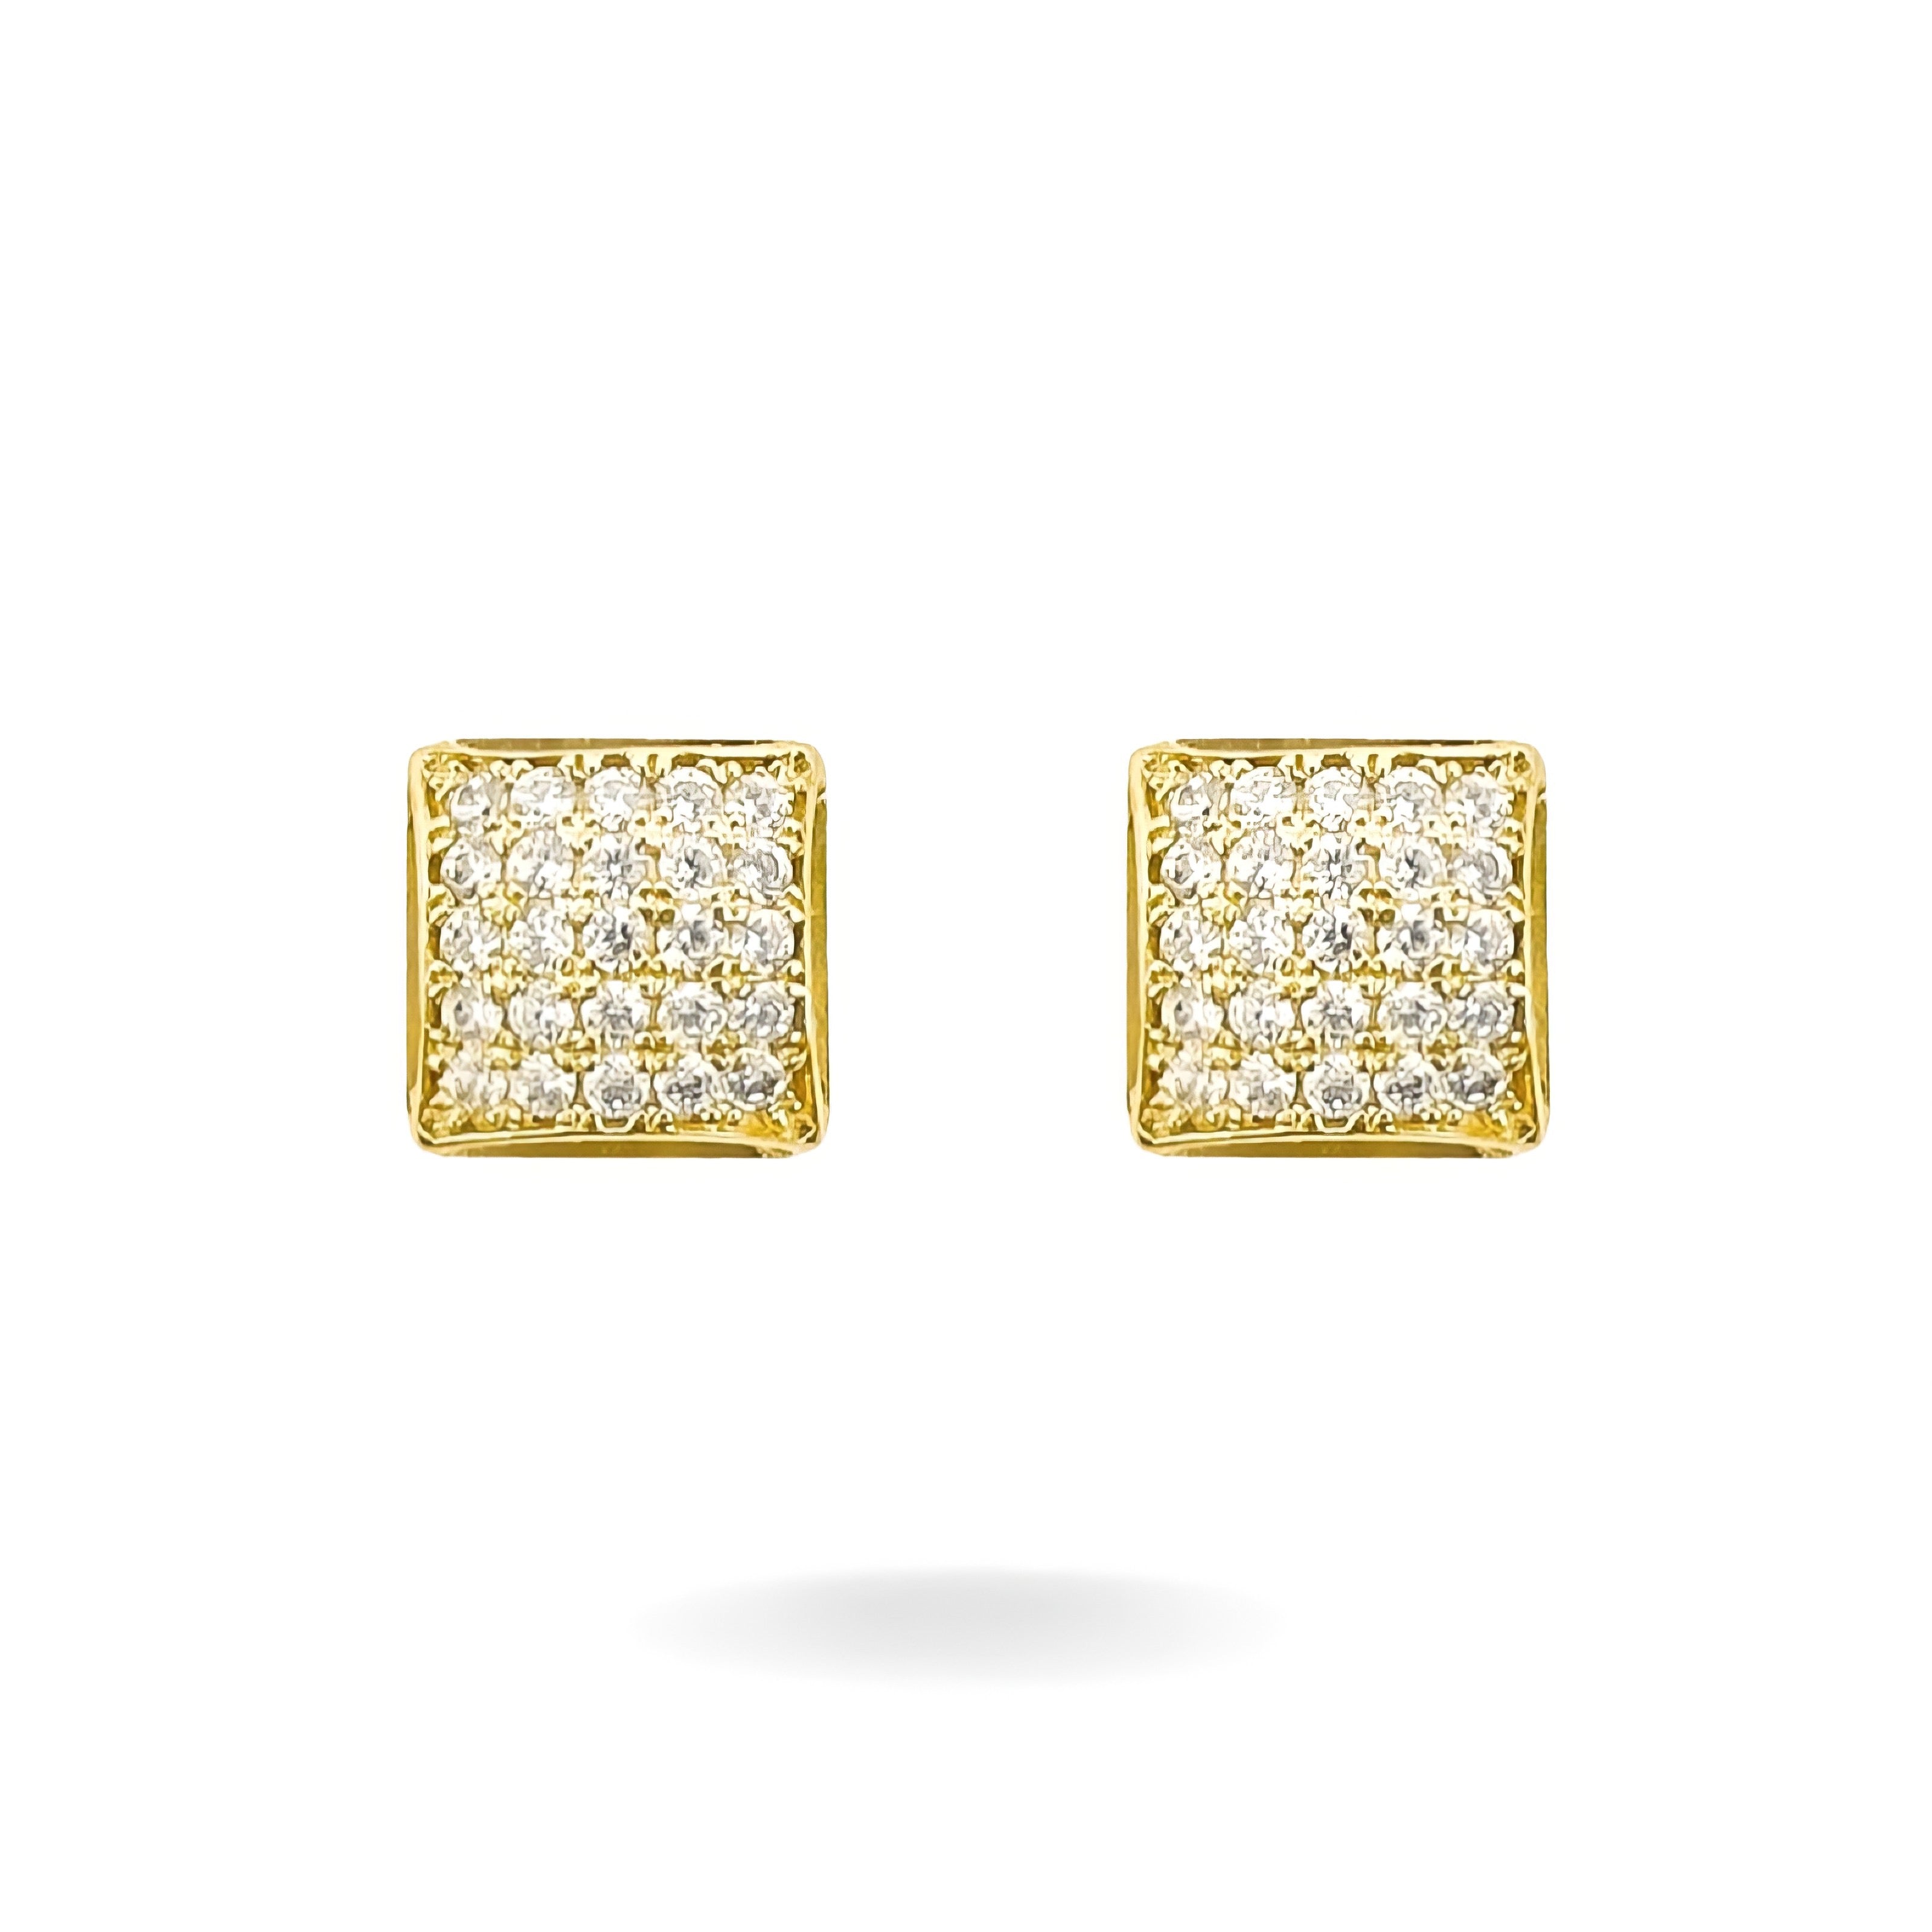 10K YELLOW GOLD PAVE SQUARE STUD EARRINGS